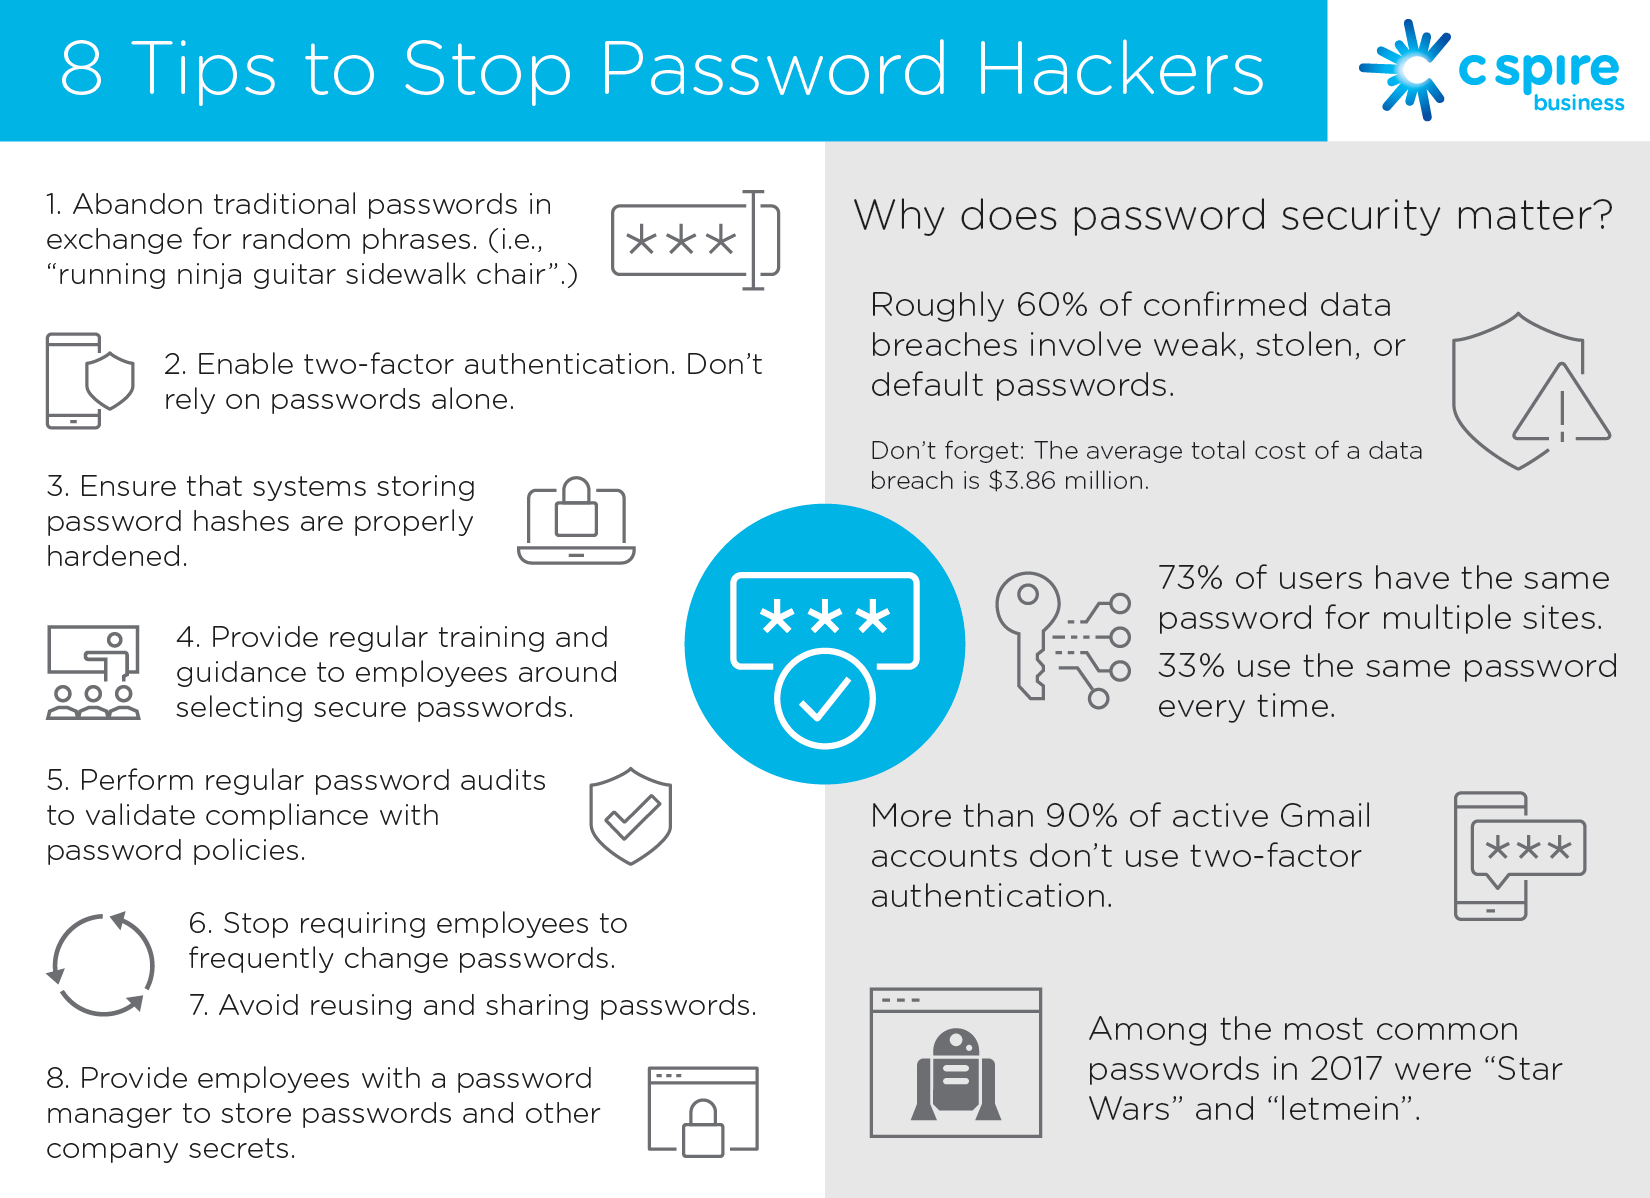  This image provides 8 tips to stop password hackers, including using strong passwords, enabling two-factor authentication, and not reusing passwords across multiple accounts.